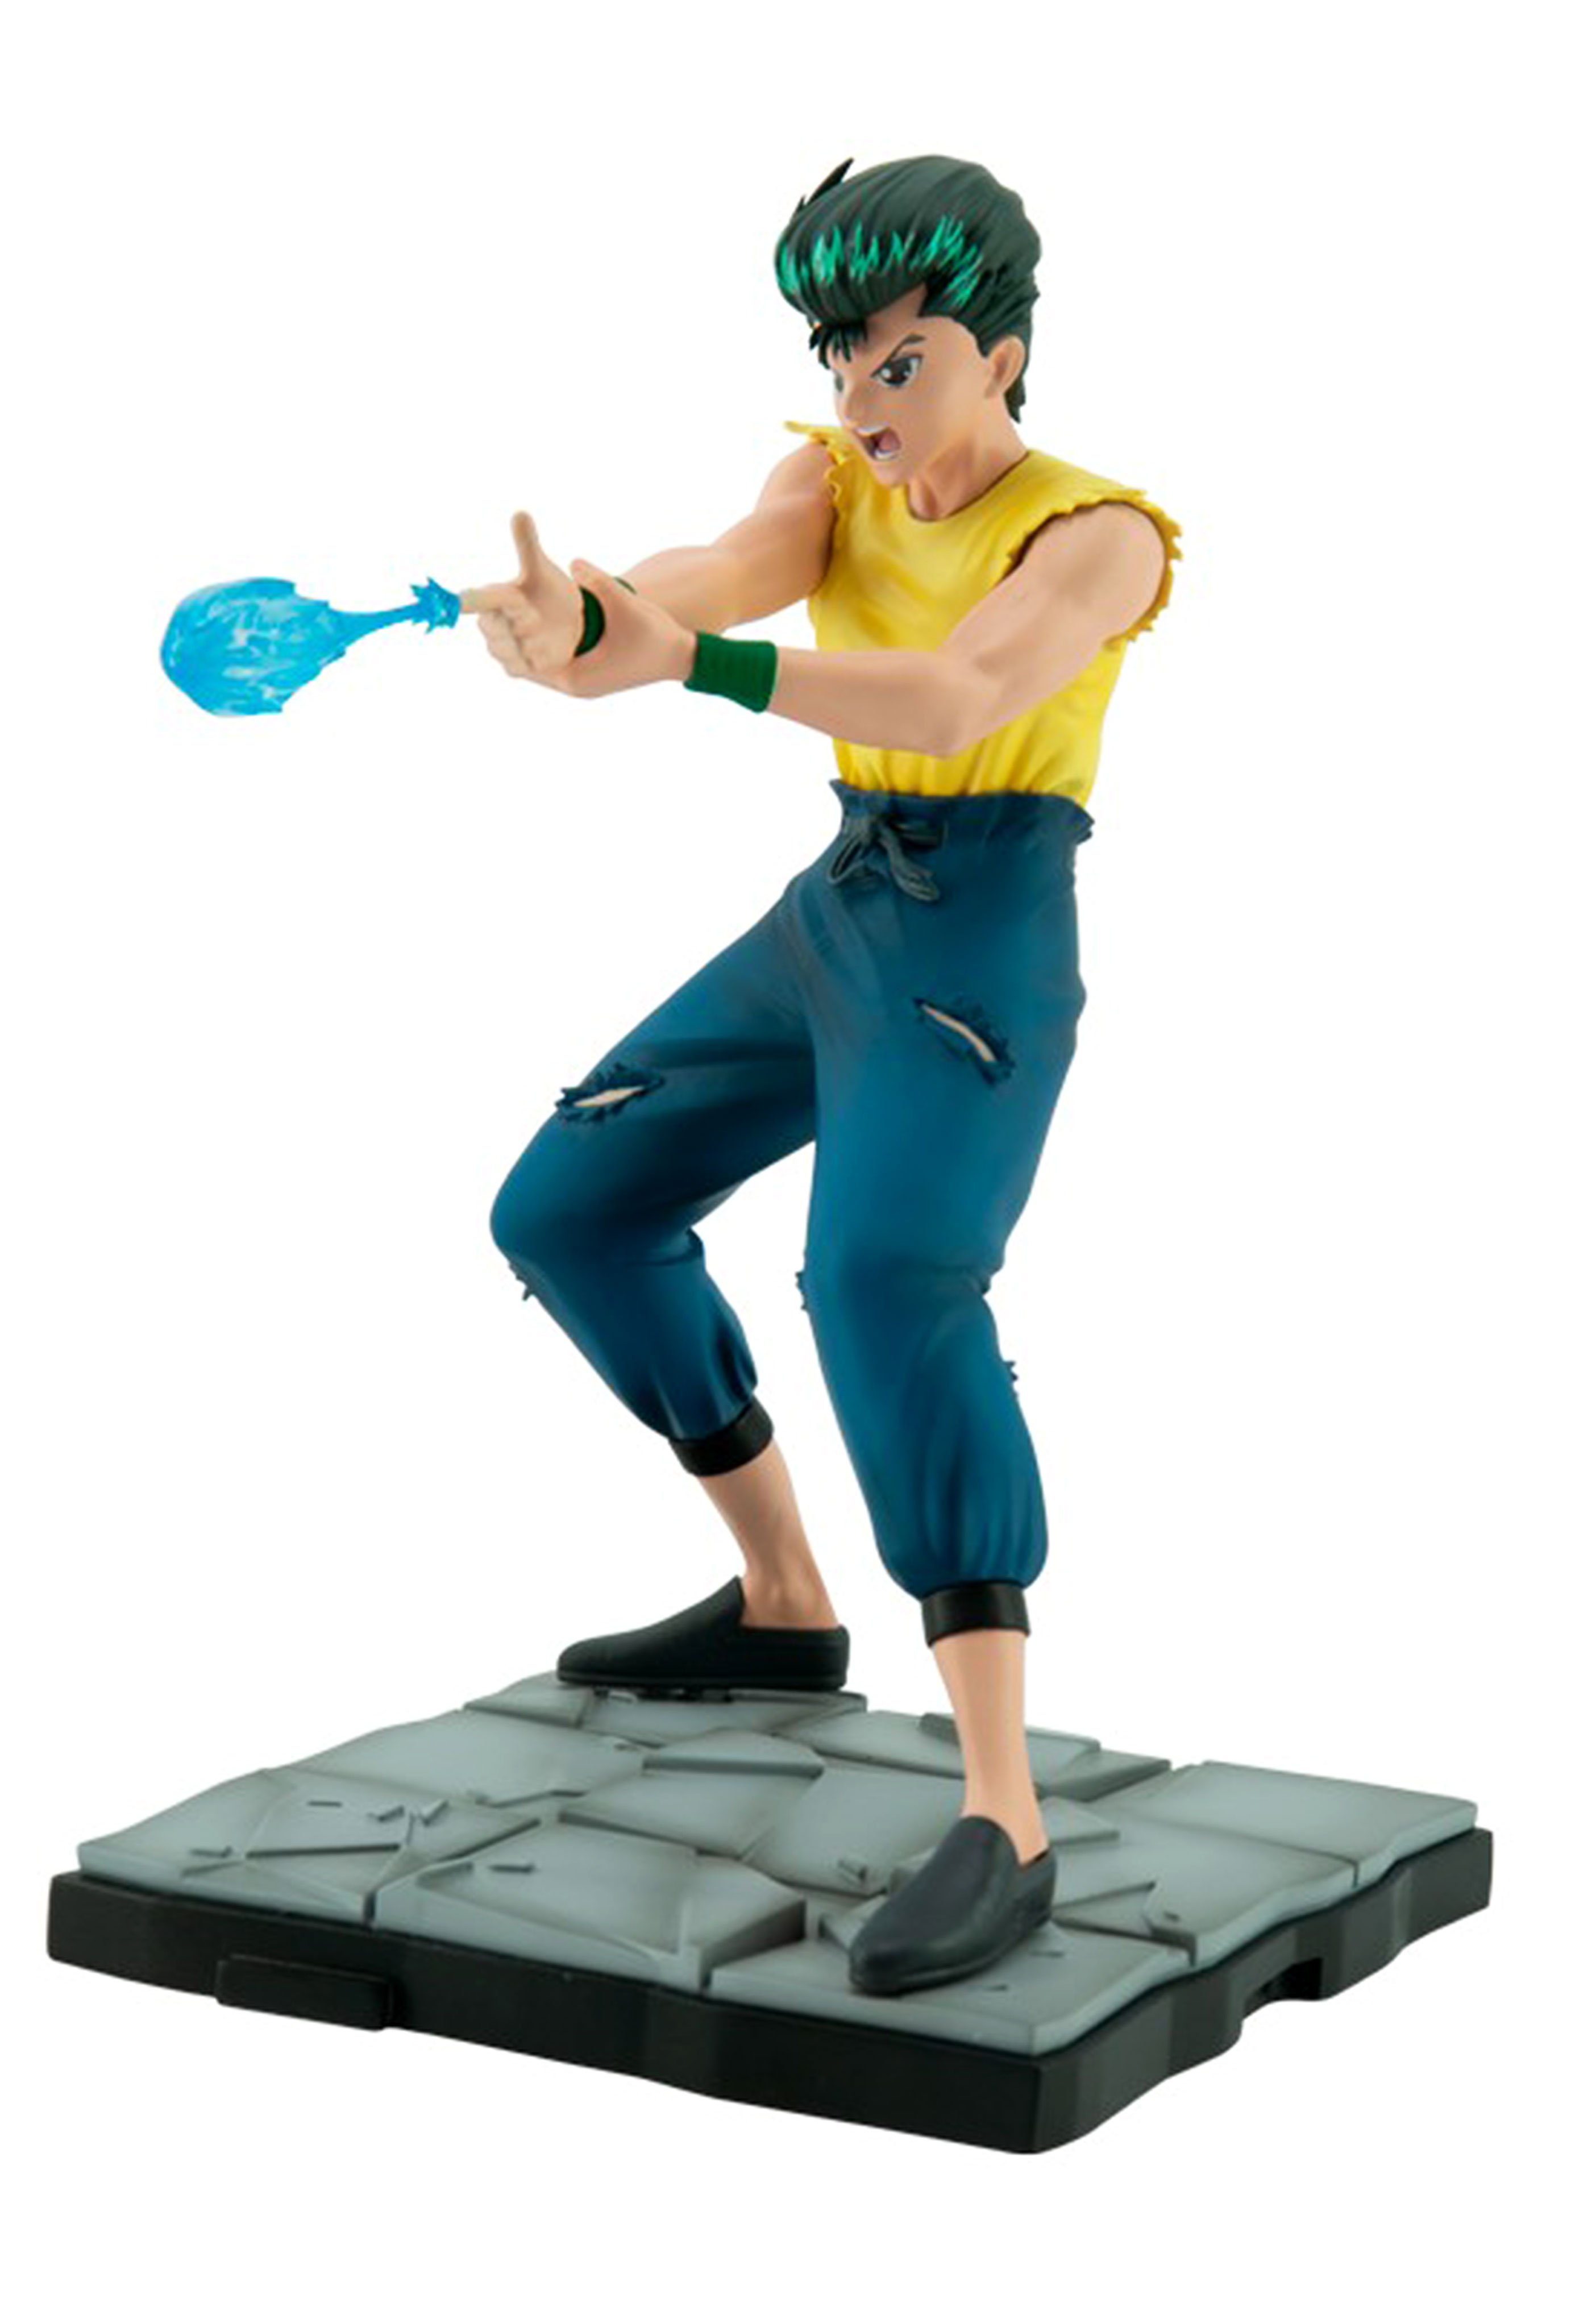 ABYstyle Studio Hunter x Hunter Gon Freecss SFC Figure – ABYstyle USA